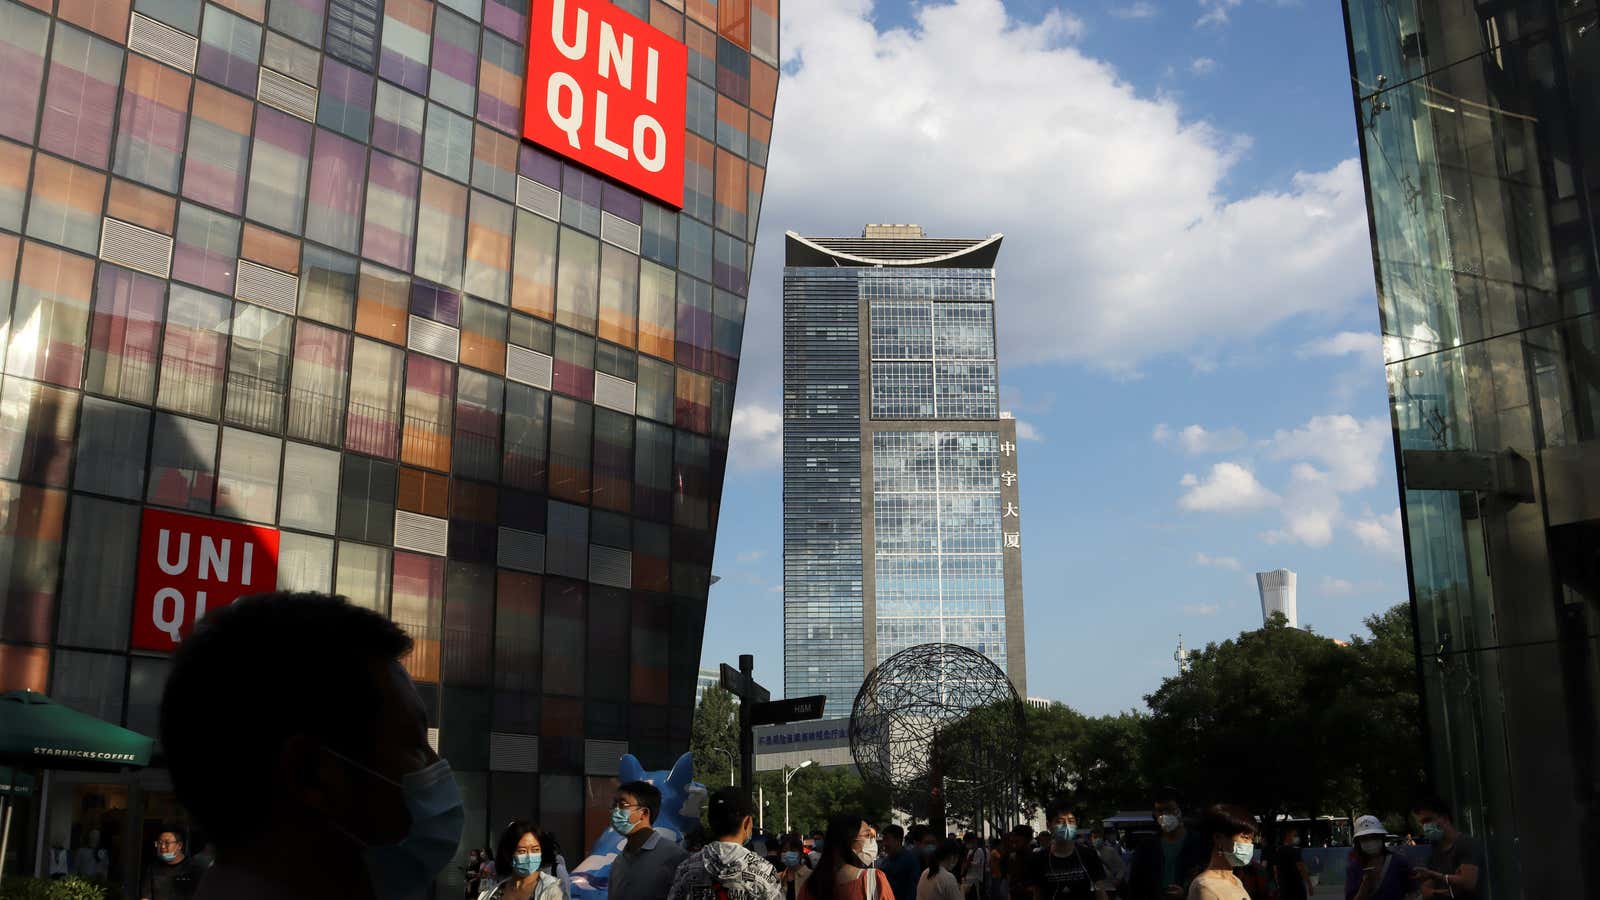 Uniqlo wants to make the most of the clothes that customers no